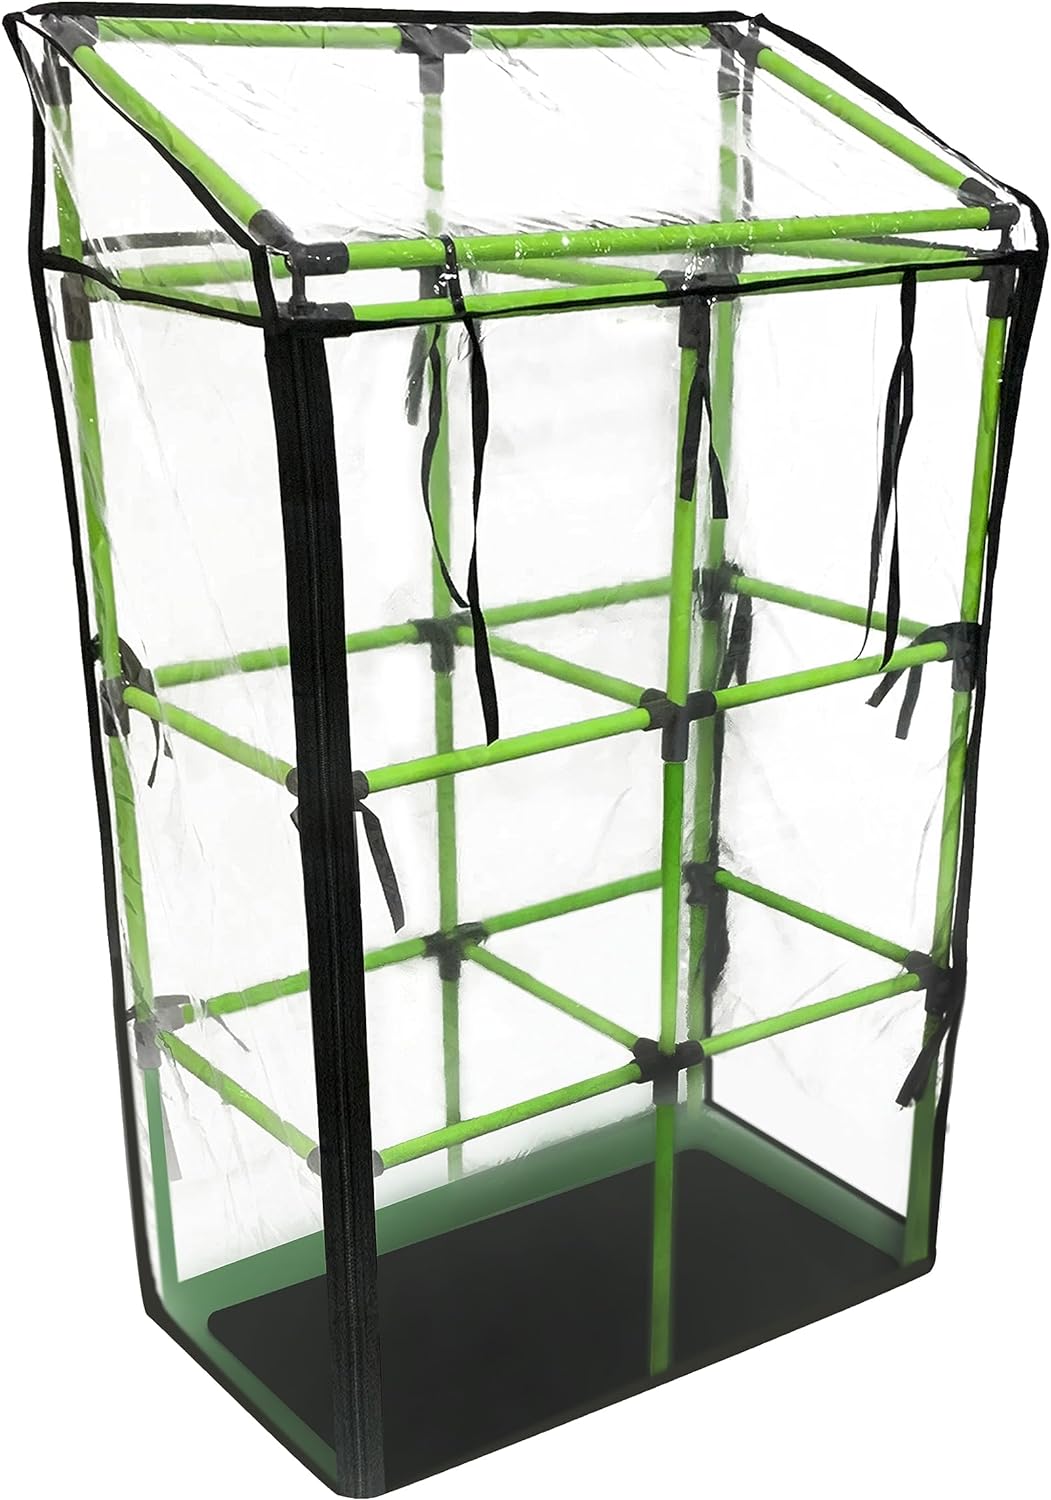 Bio Green JGL-C Greenhouse Compatible with City Jungle Trellis and Heidelberg – Outdoor and Indoor 2 Zippers – Protection Plant Covers – Transparent Design